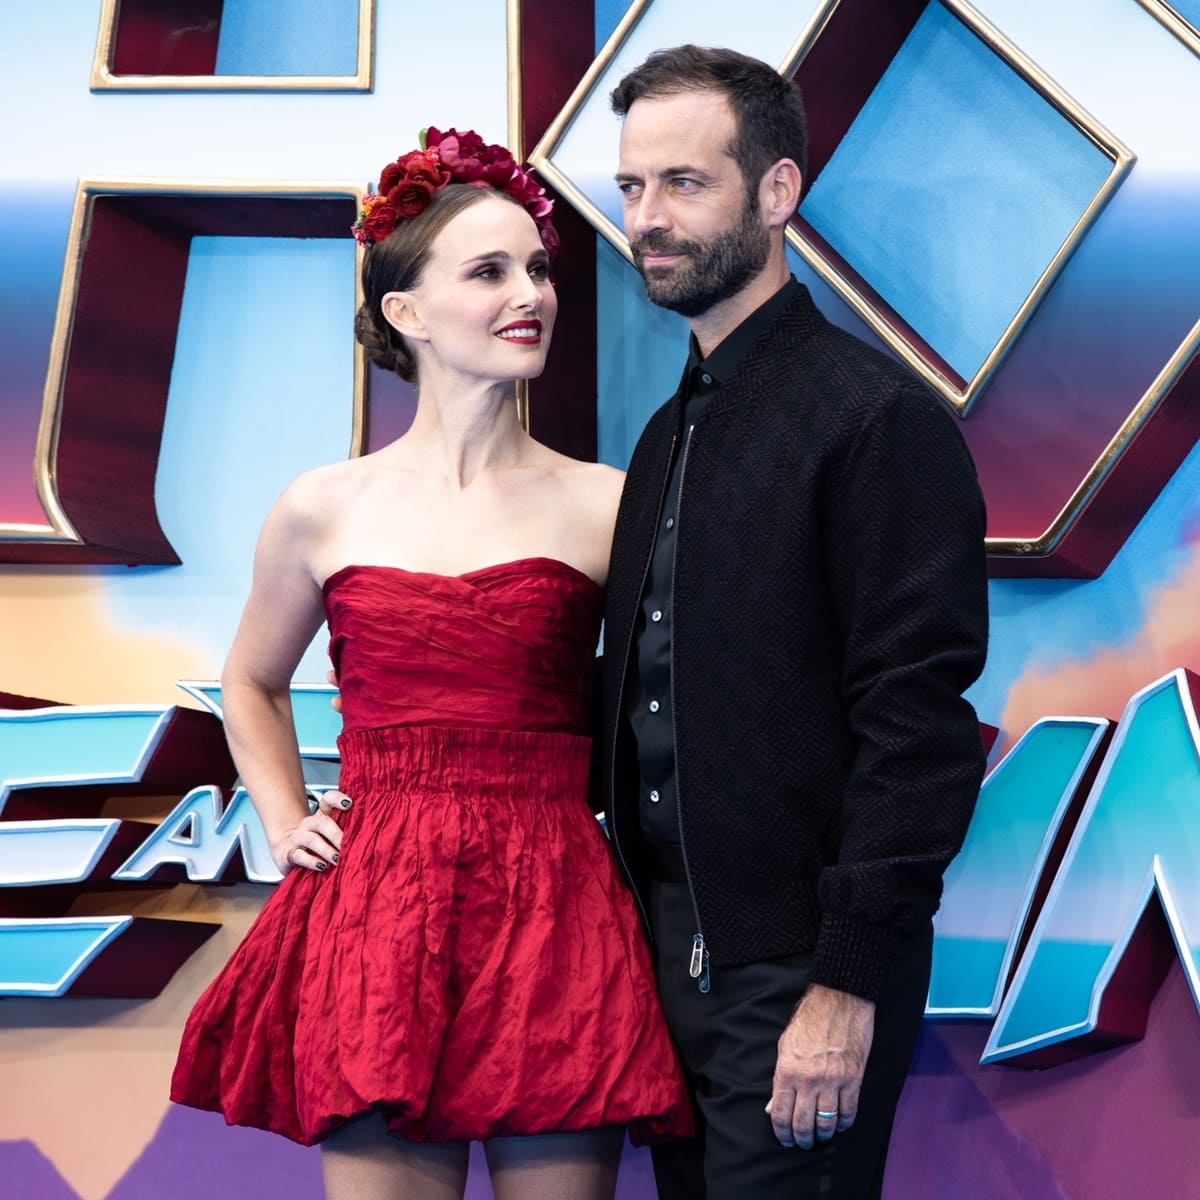 Benjamin Millepied is approximately 5 feet 10 inches (1.78 meters) tall, making him noticeably taller than Natalie Portman, who stands at 5 feet 2 ½ inches (158.8 cm), resulting in a height difference of around 7 ½ inches (19.2 cm)